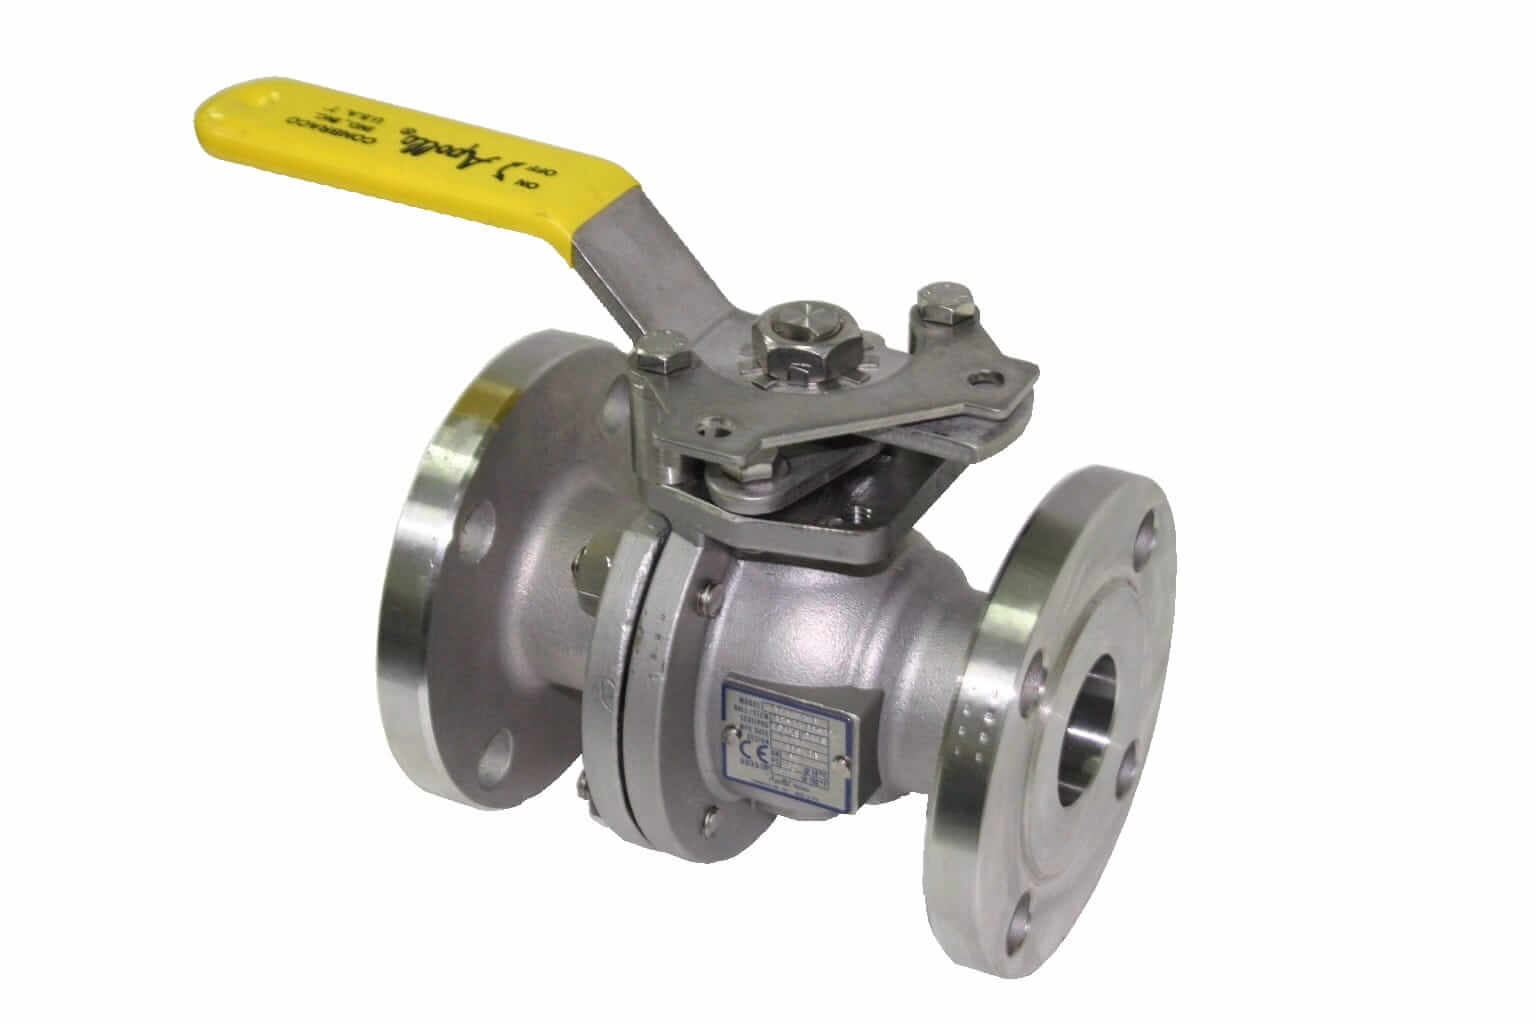 Ball Valve, Size 2 Inch, Full Port, Stainless Steel, Round Handle